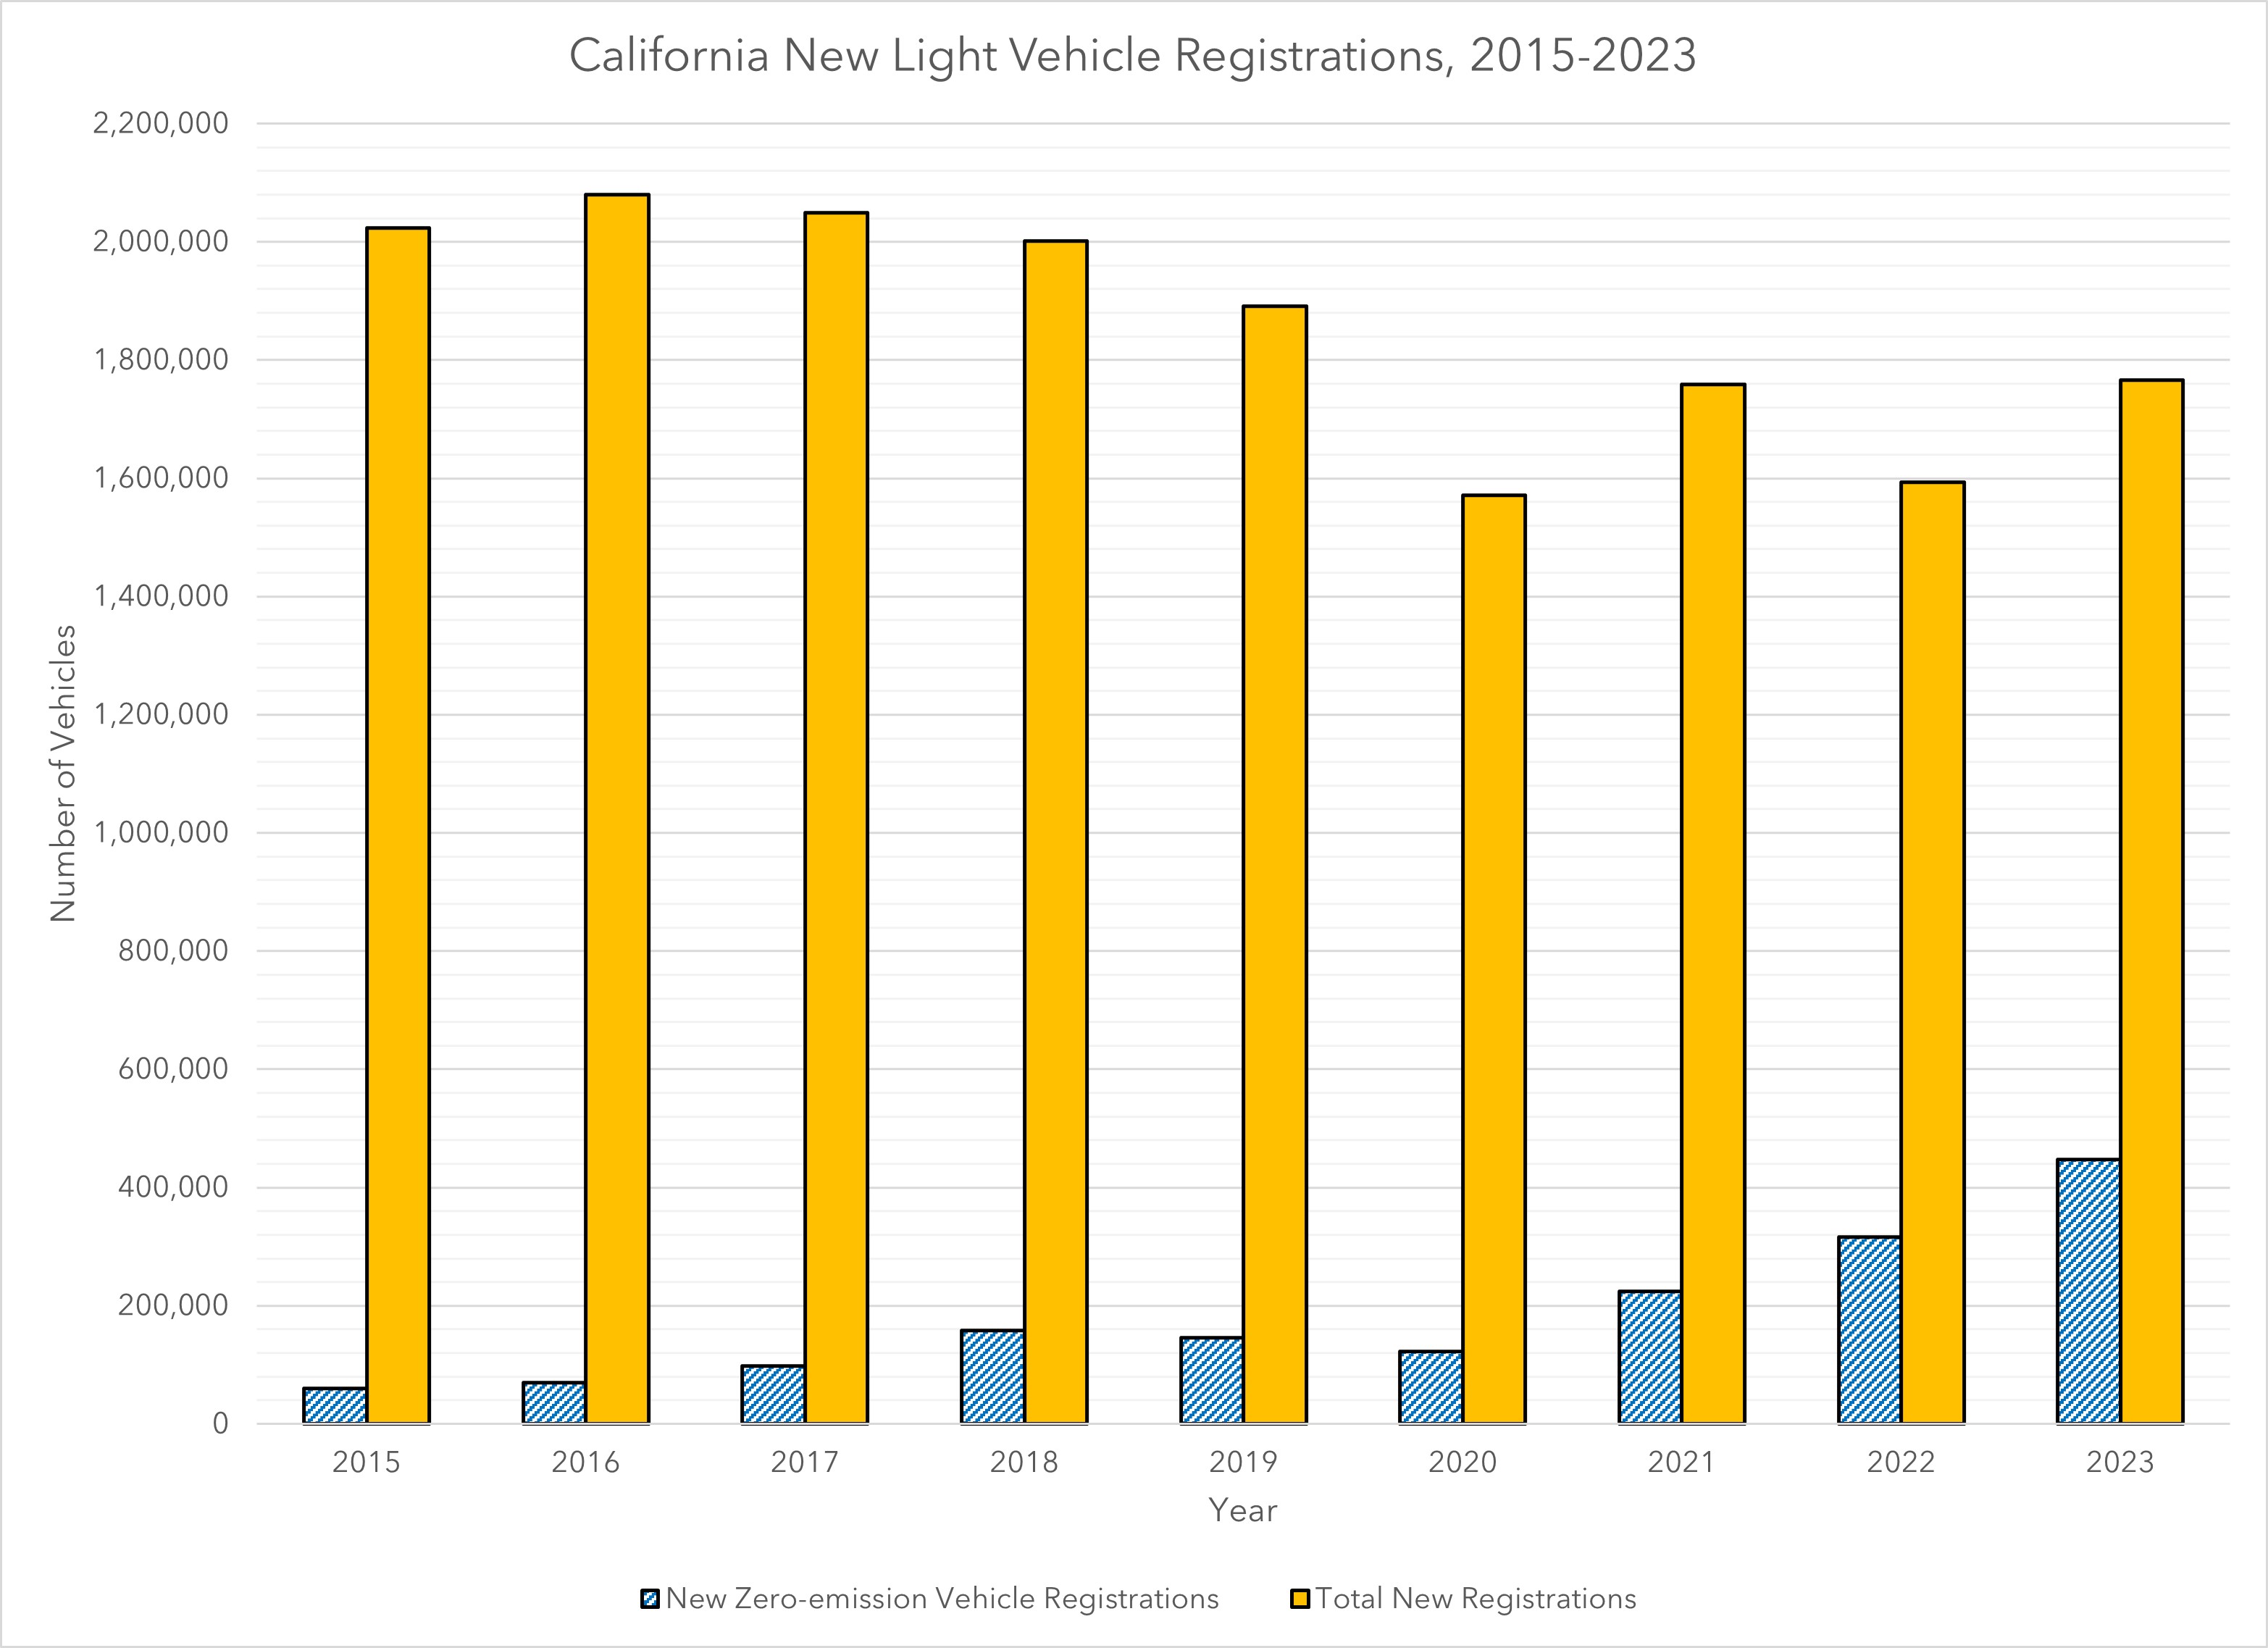 This visual displays California's annual light-duty new vehicle registrations from 2015 through 2023. It compares new zero-emission vehicle registrations against total new registrations.